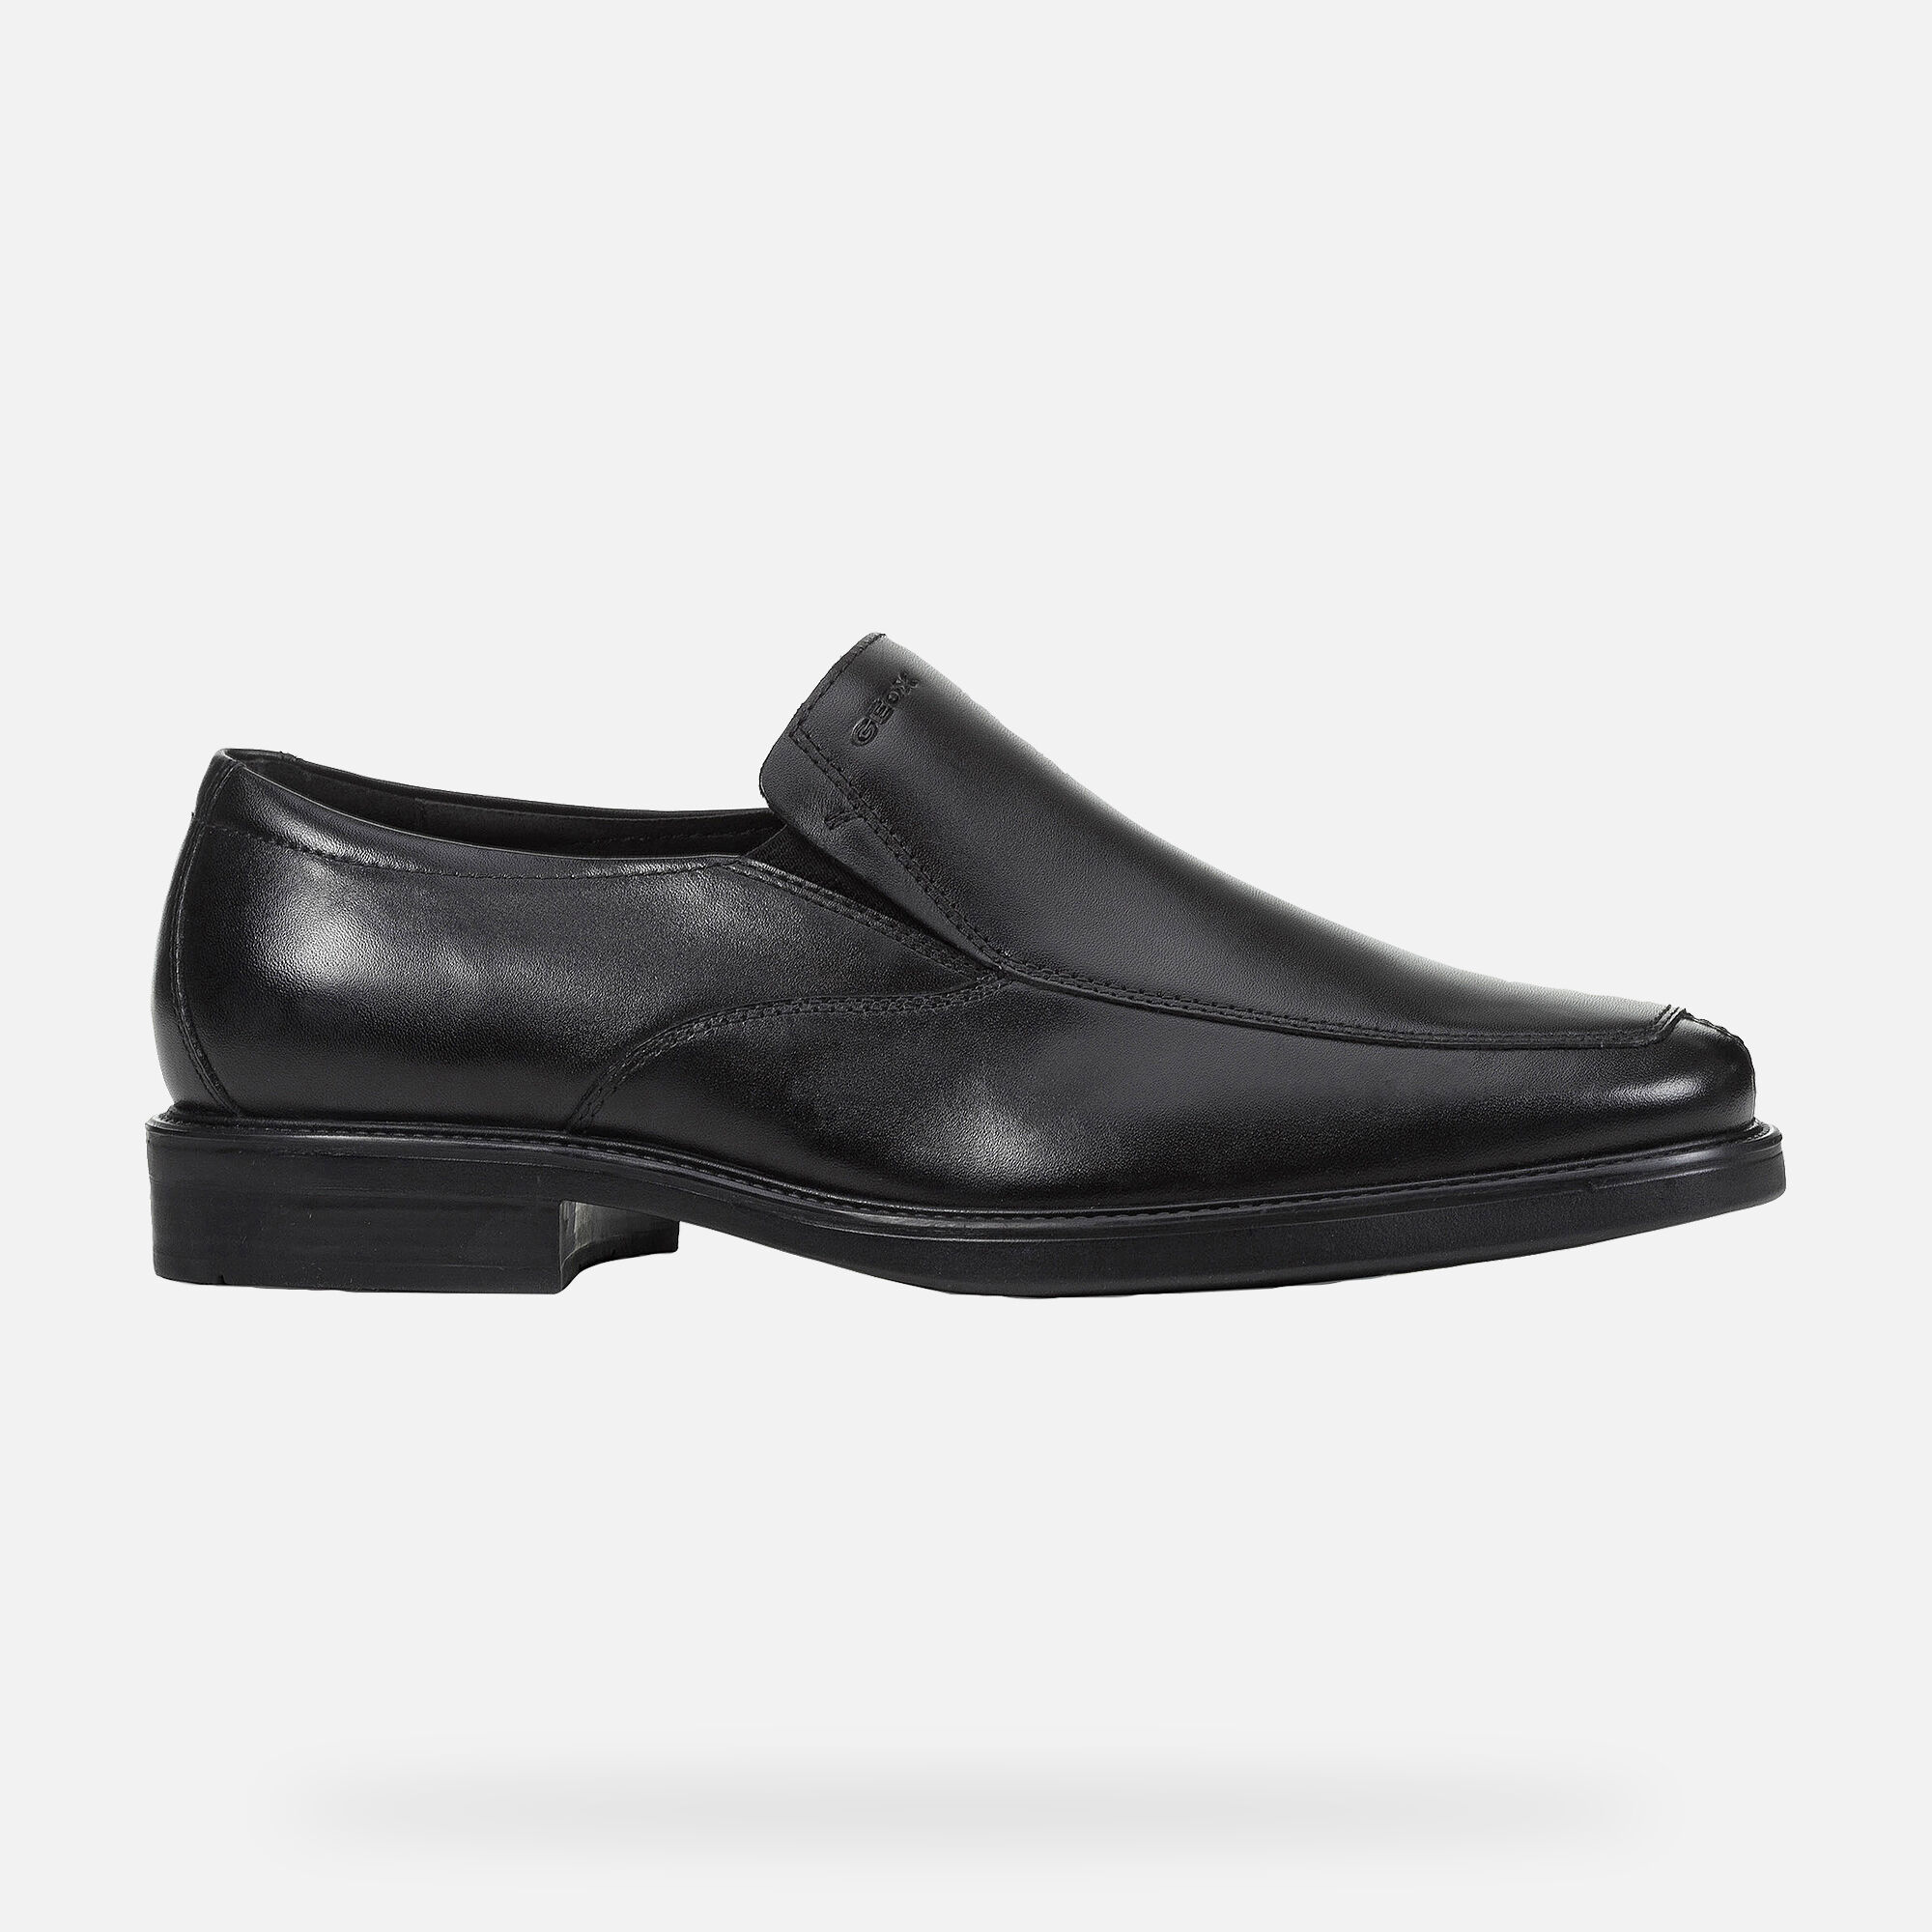 geox formal shoes